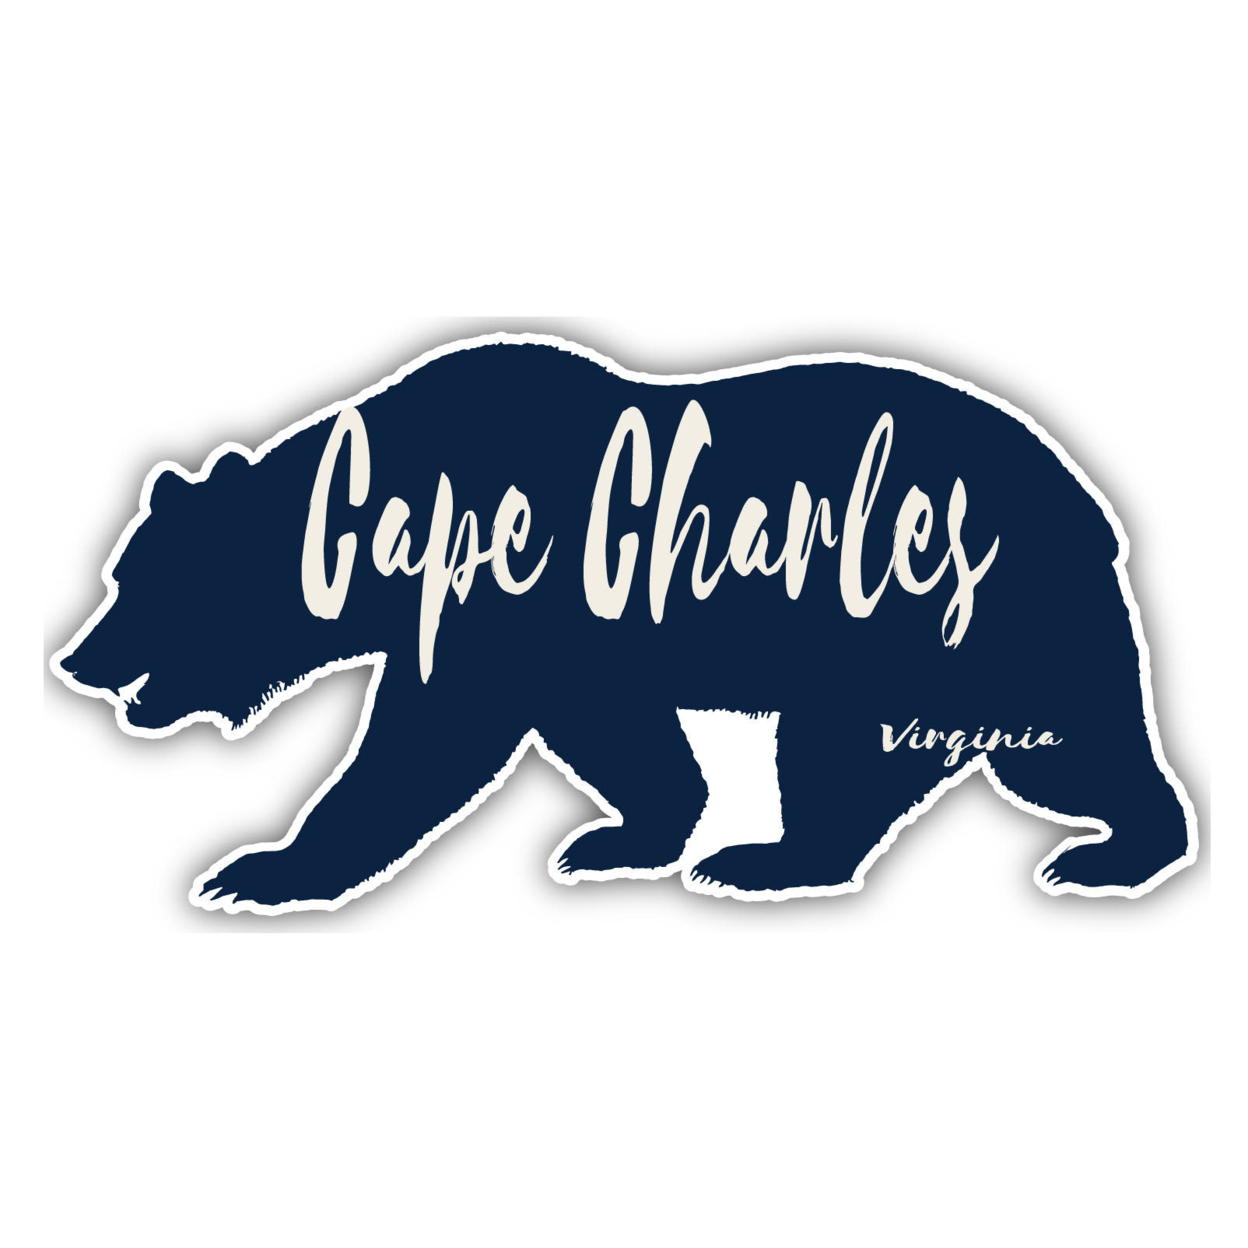 Cape Charles Virginia Souvenir Decorative Stickers (Choose Theme And Size) - 4-Pack, 2-Inch, Tent